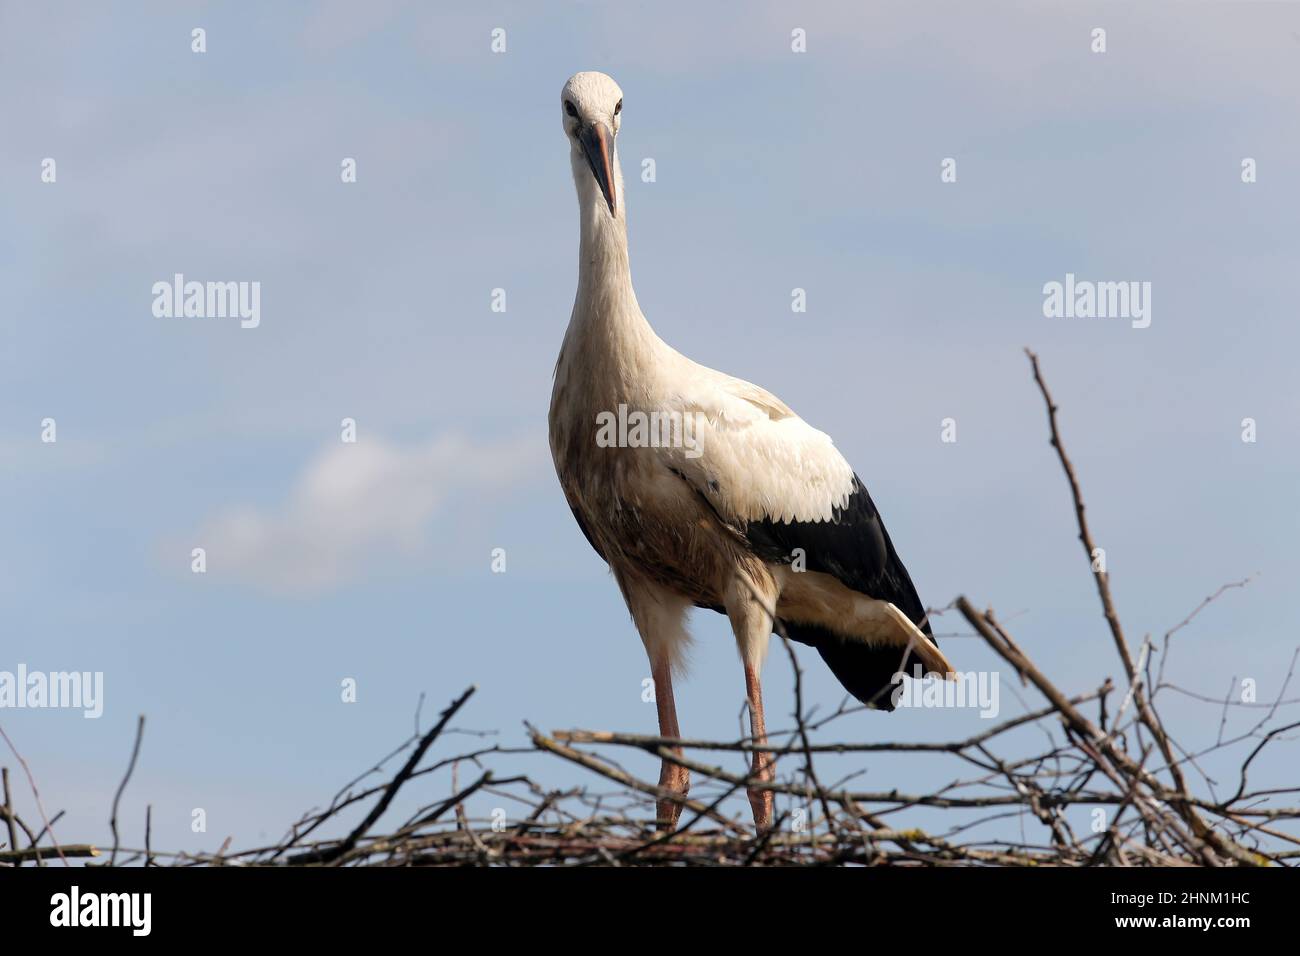 Stork in the nest, Lithuania, East Europe Stock Photo